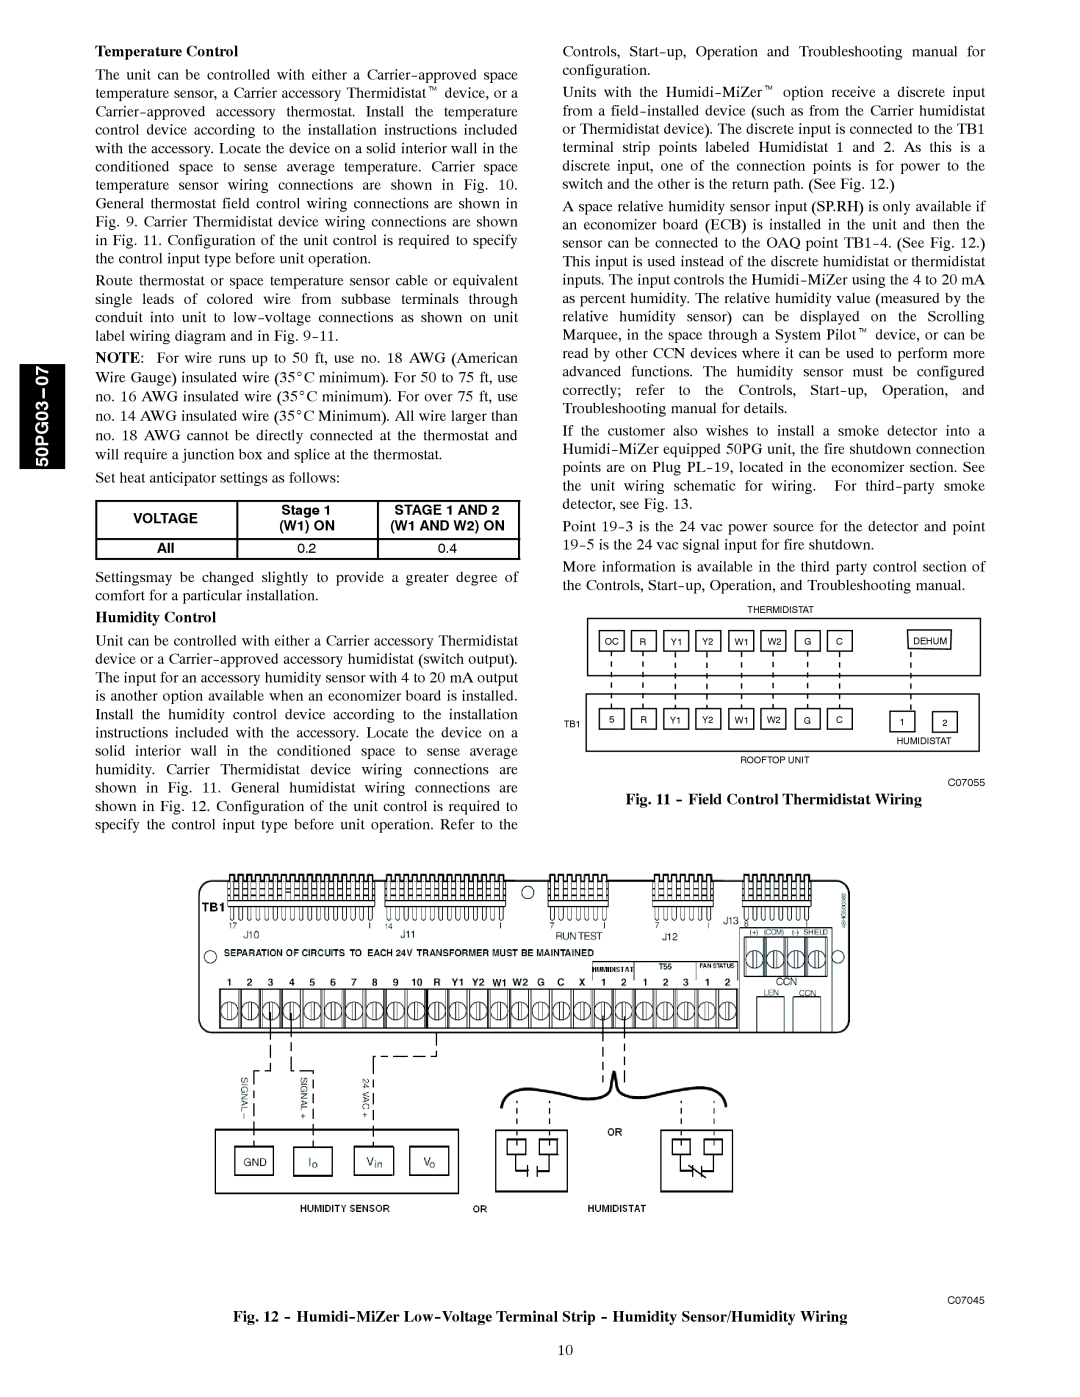 Carrier 50PG03-07 Temperature Control, Humidity Control, Field Control Thermidistat Wiring, 50PG03--07 